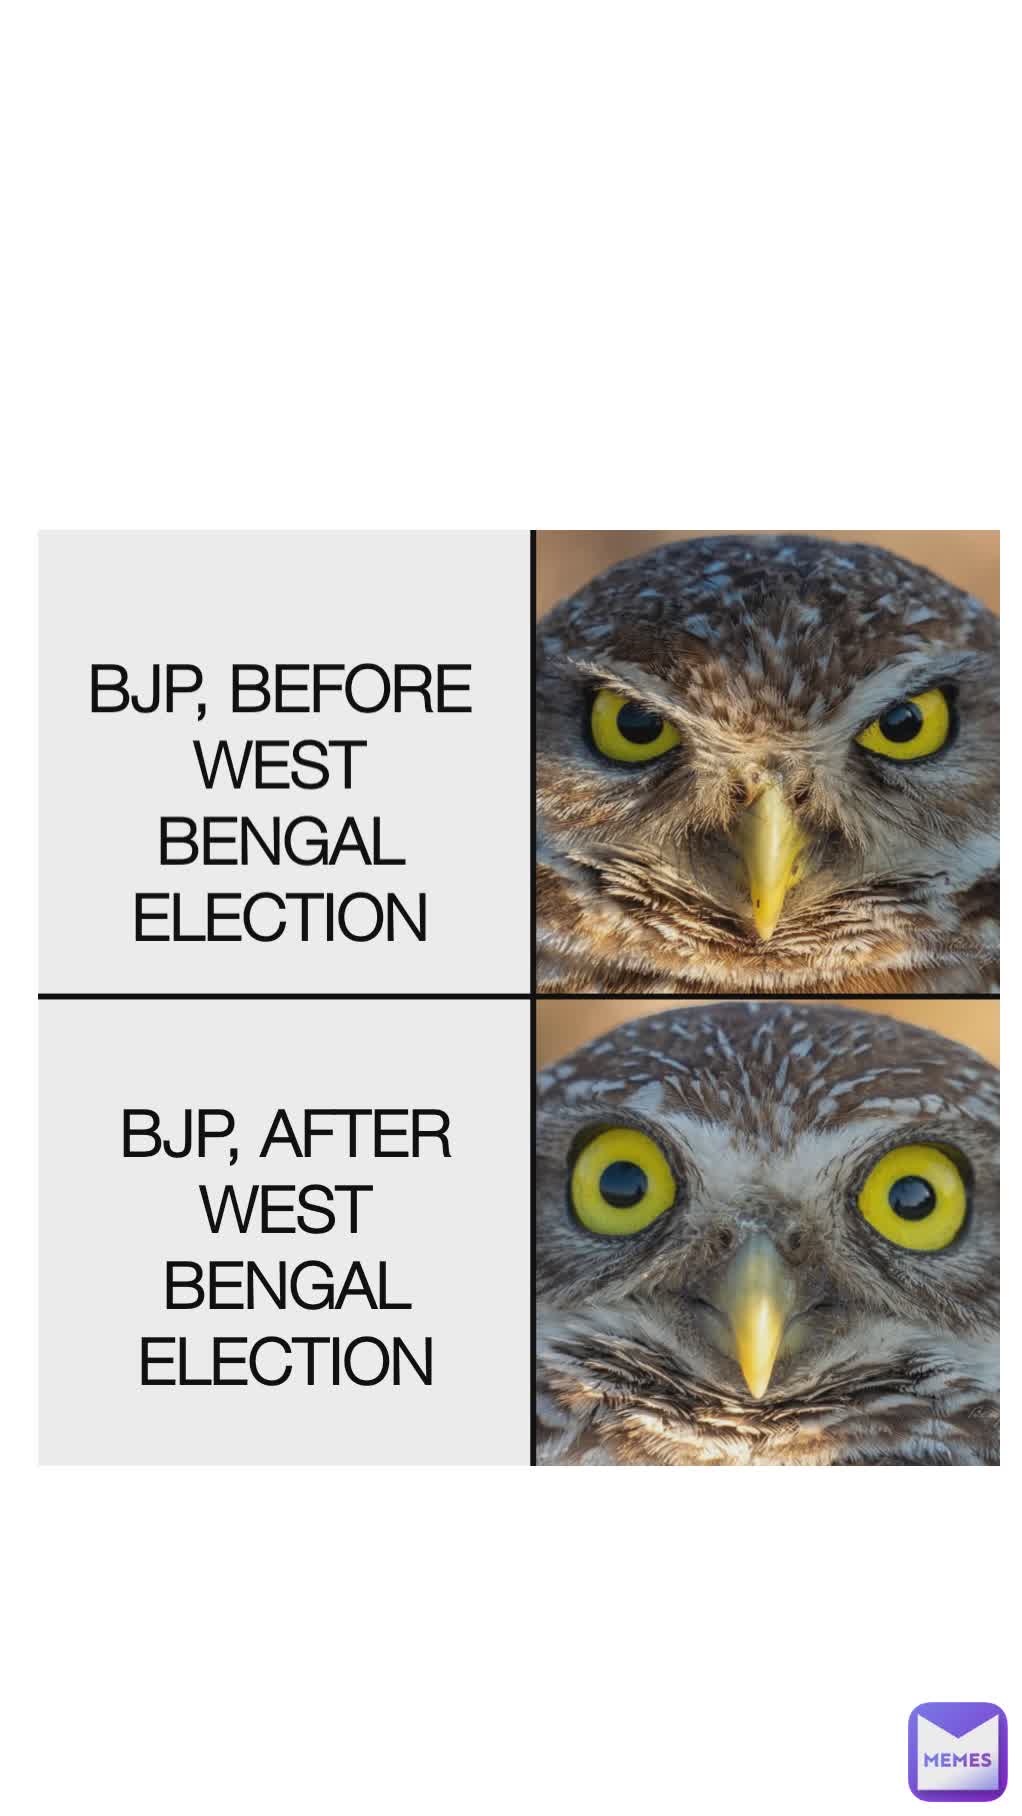 BJP, BEFORE WEST BENGAL ELECTION BJP, AFTER WEST BENGAL ELECTION